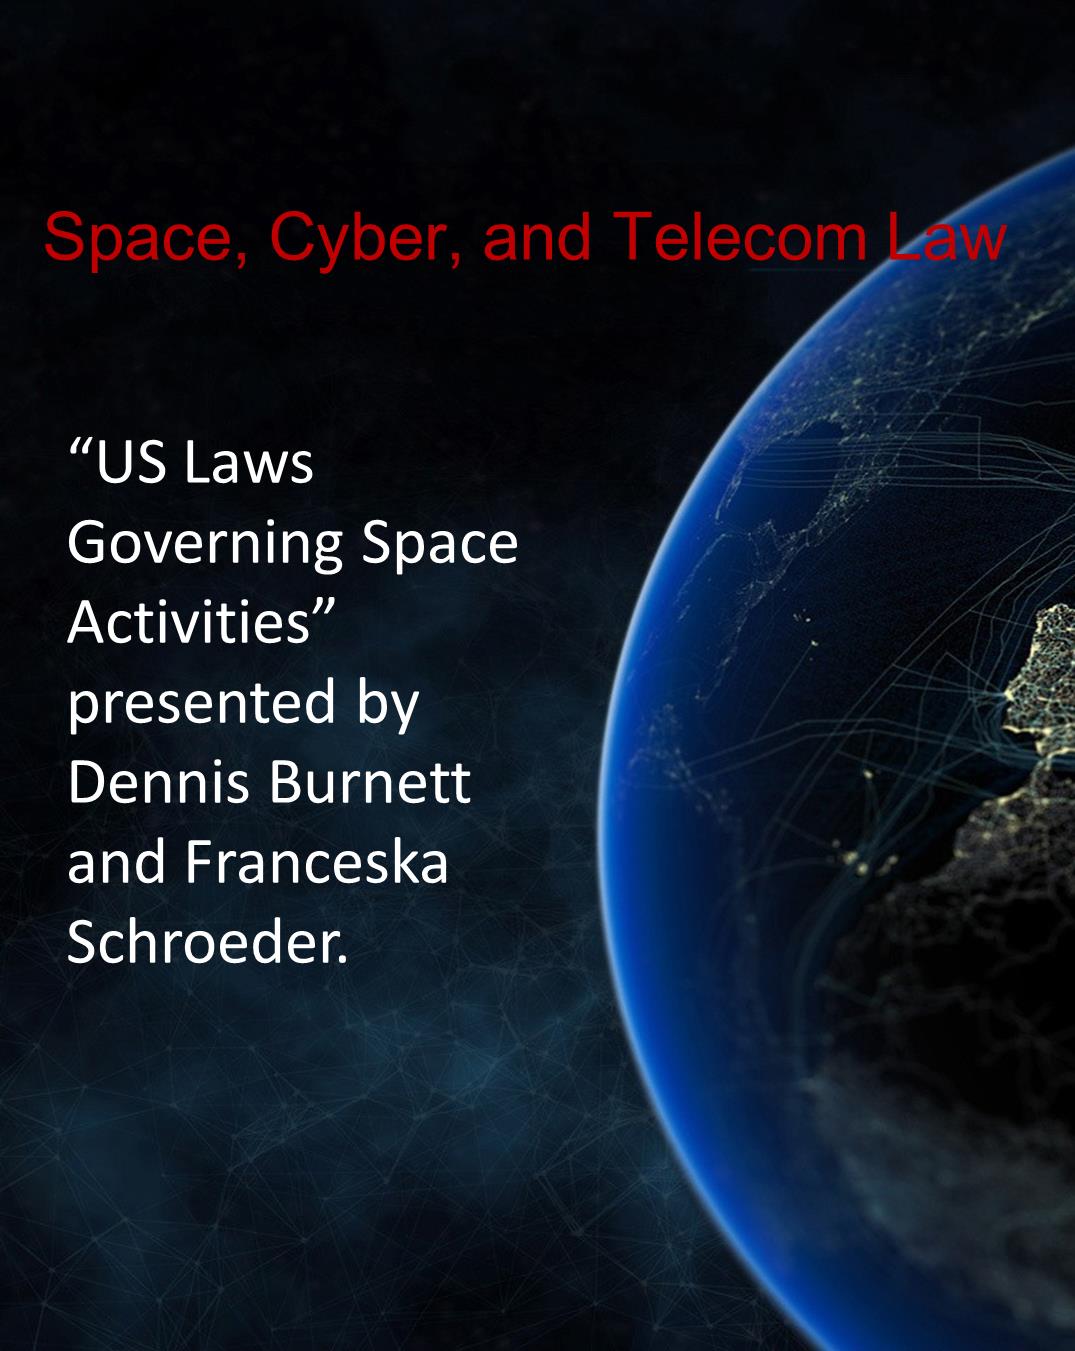 Space, Cyber, and Telecom Law